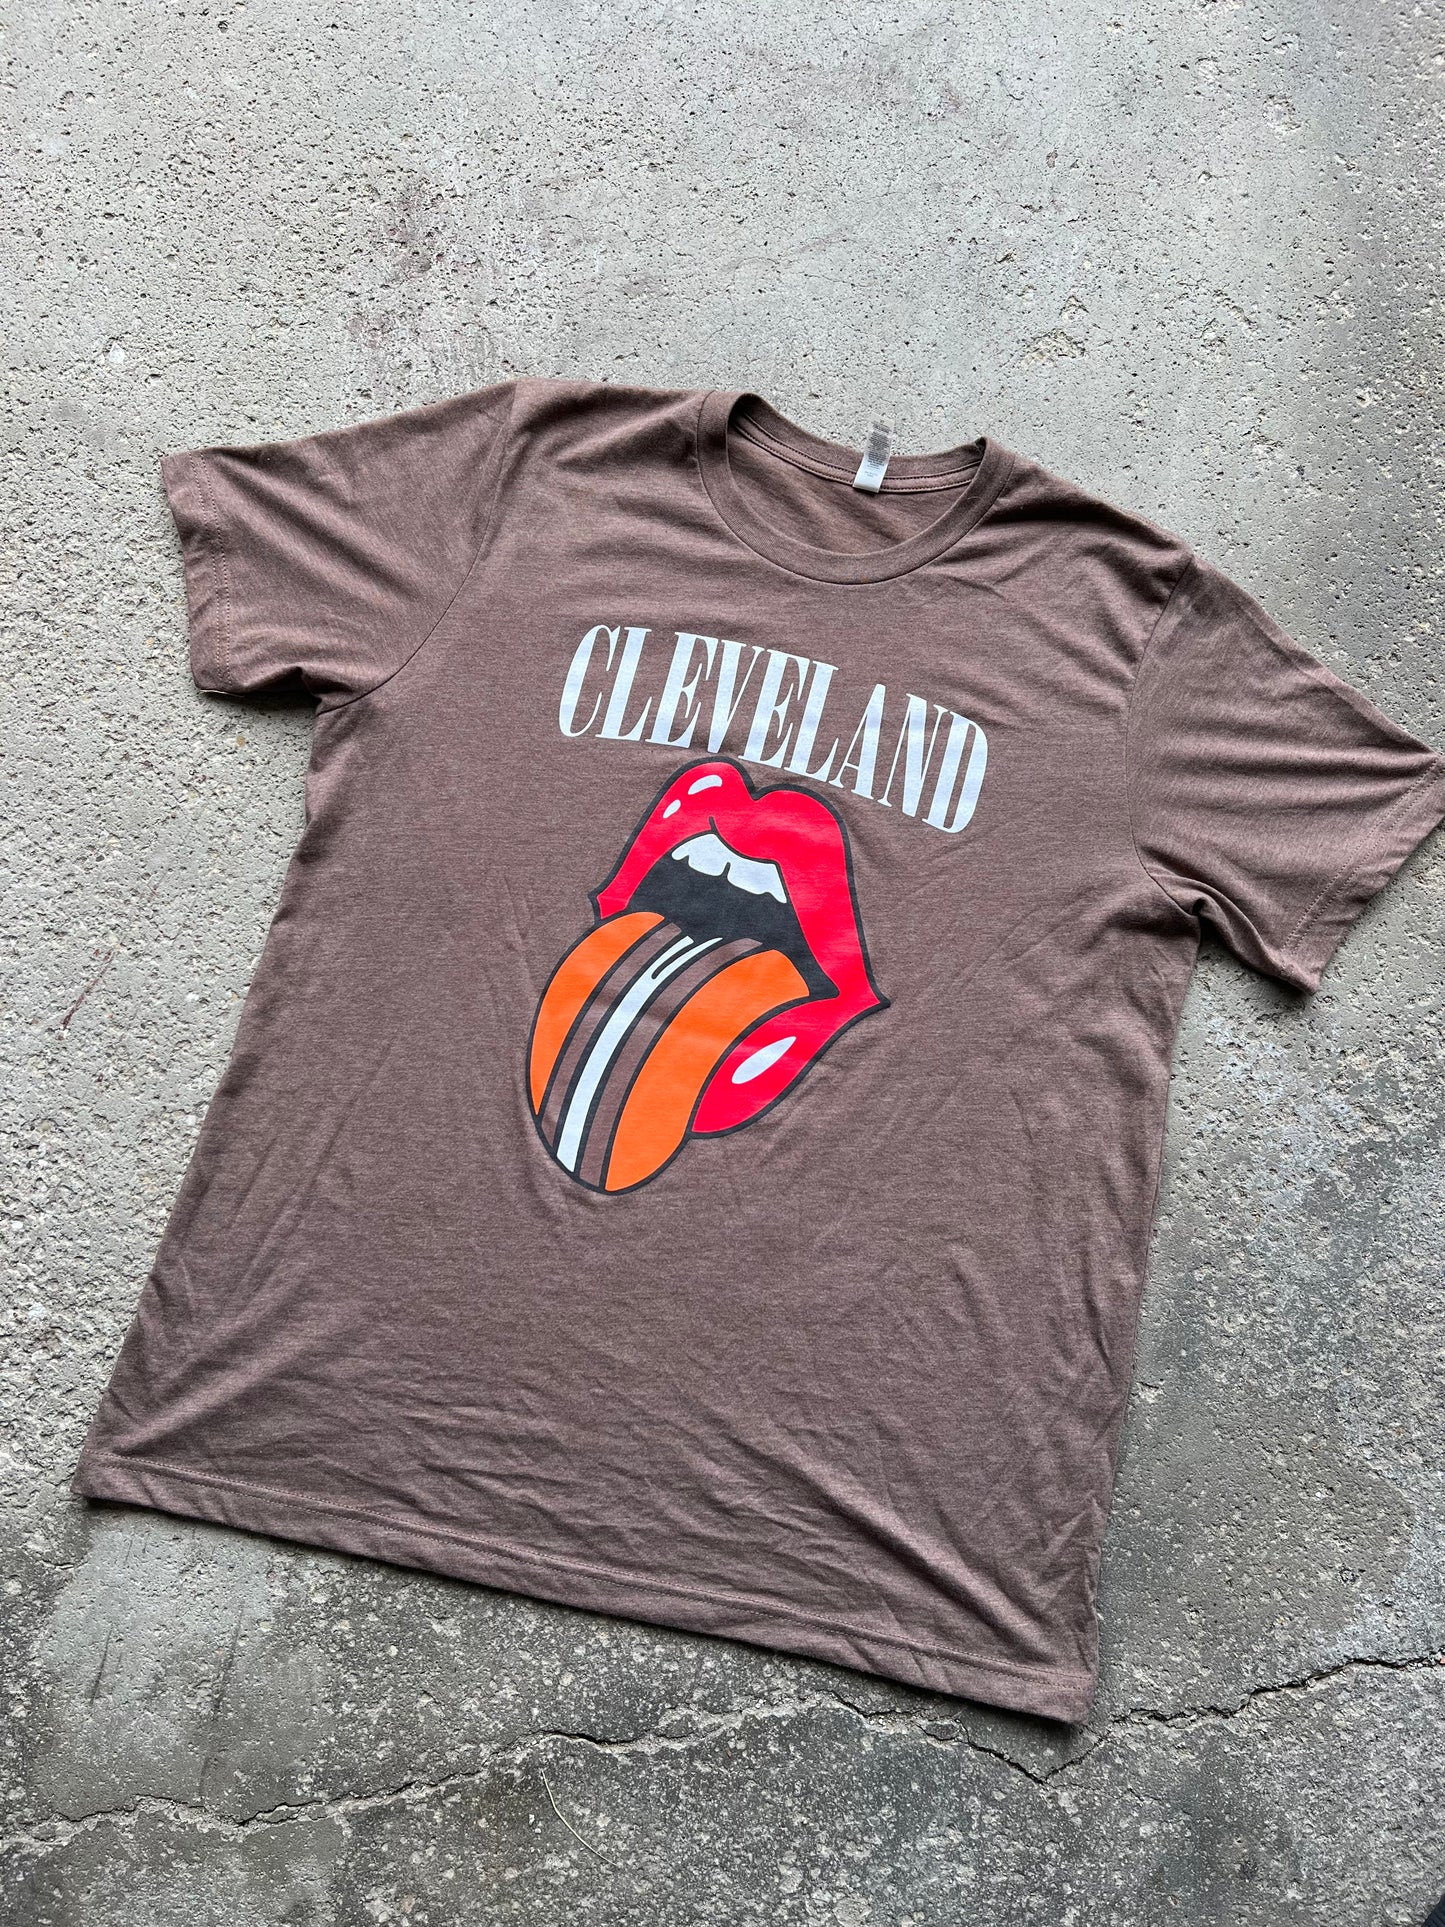 CLEVELAND ROCKS GRAPHIC TEE